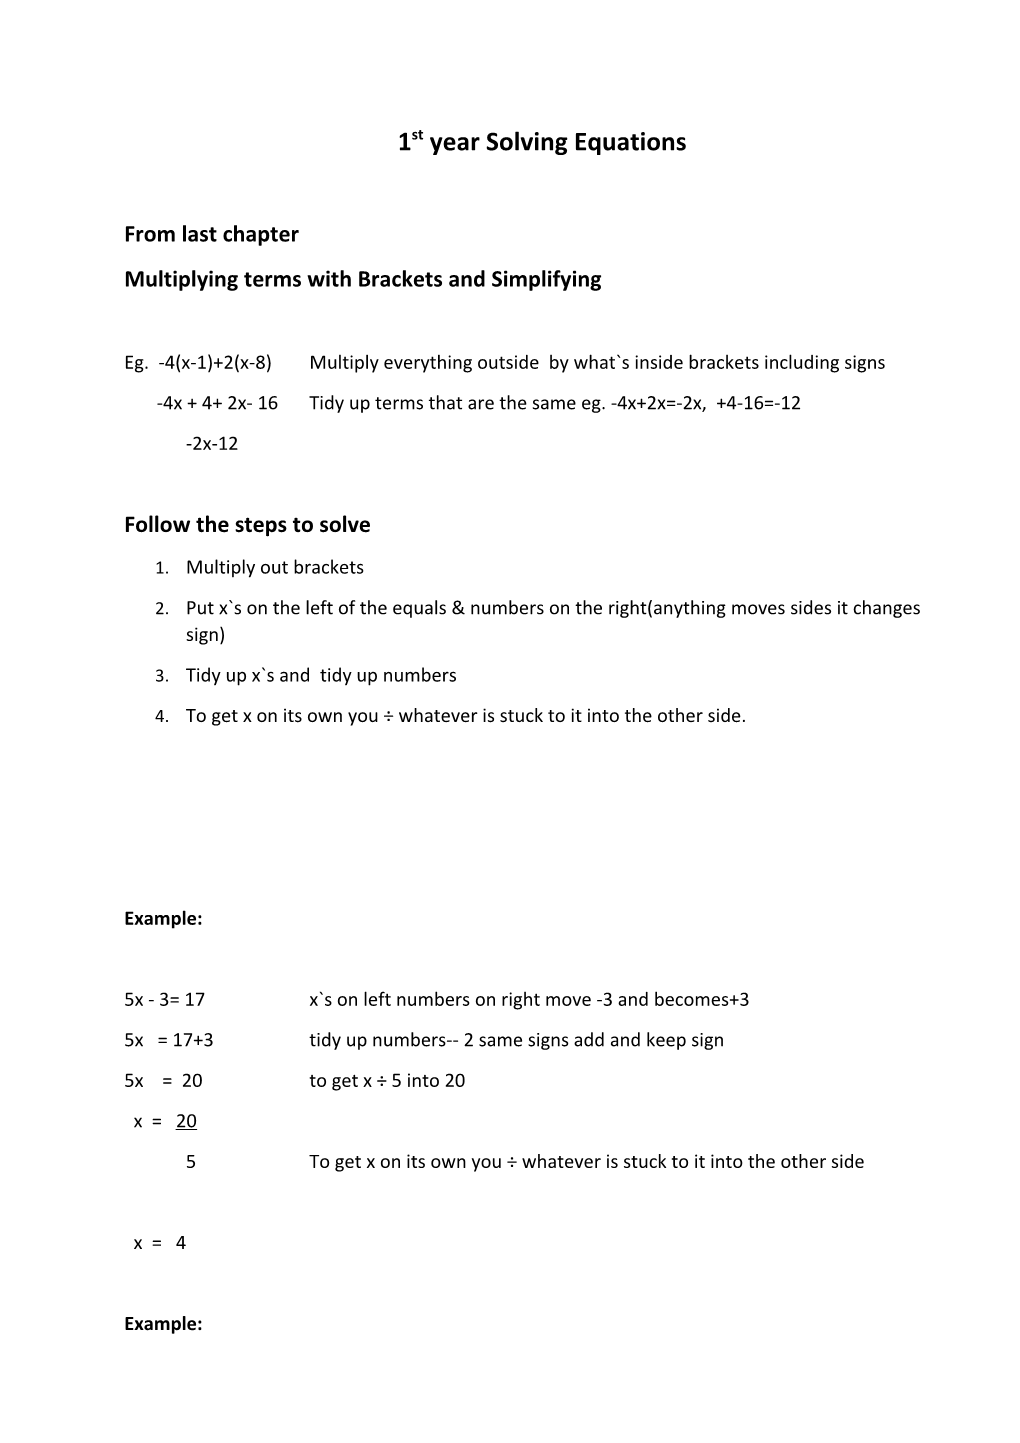 Multiplying Terms with Brackets and Simplifying